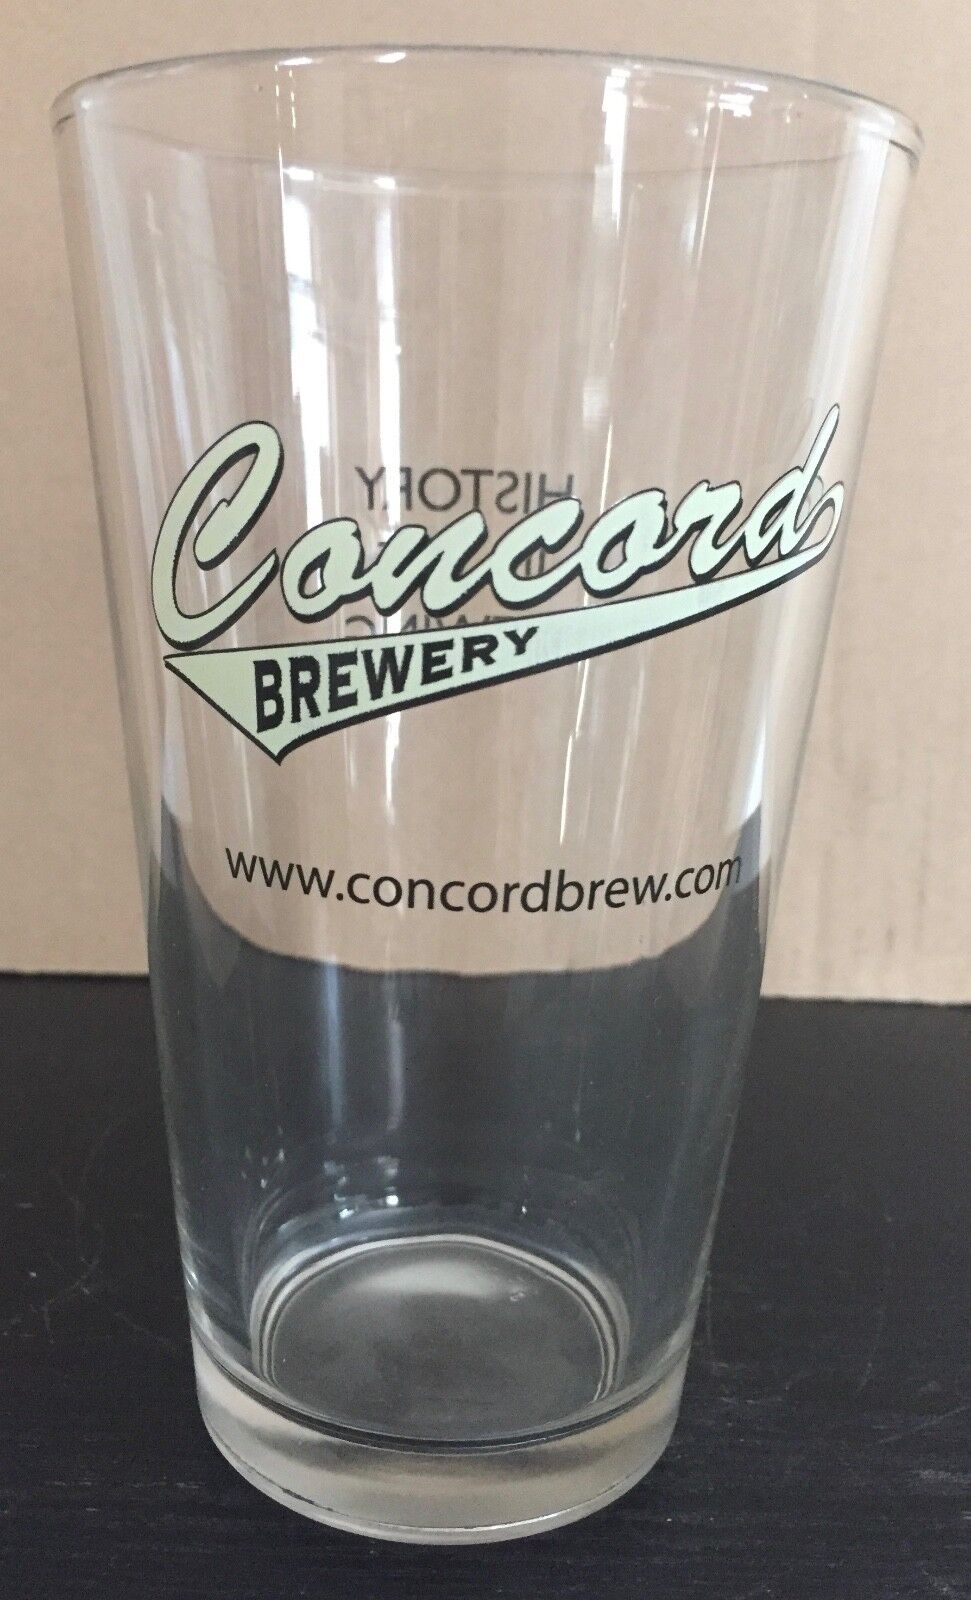 Concord Brewery Pint Beer Glass